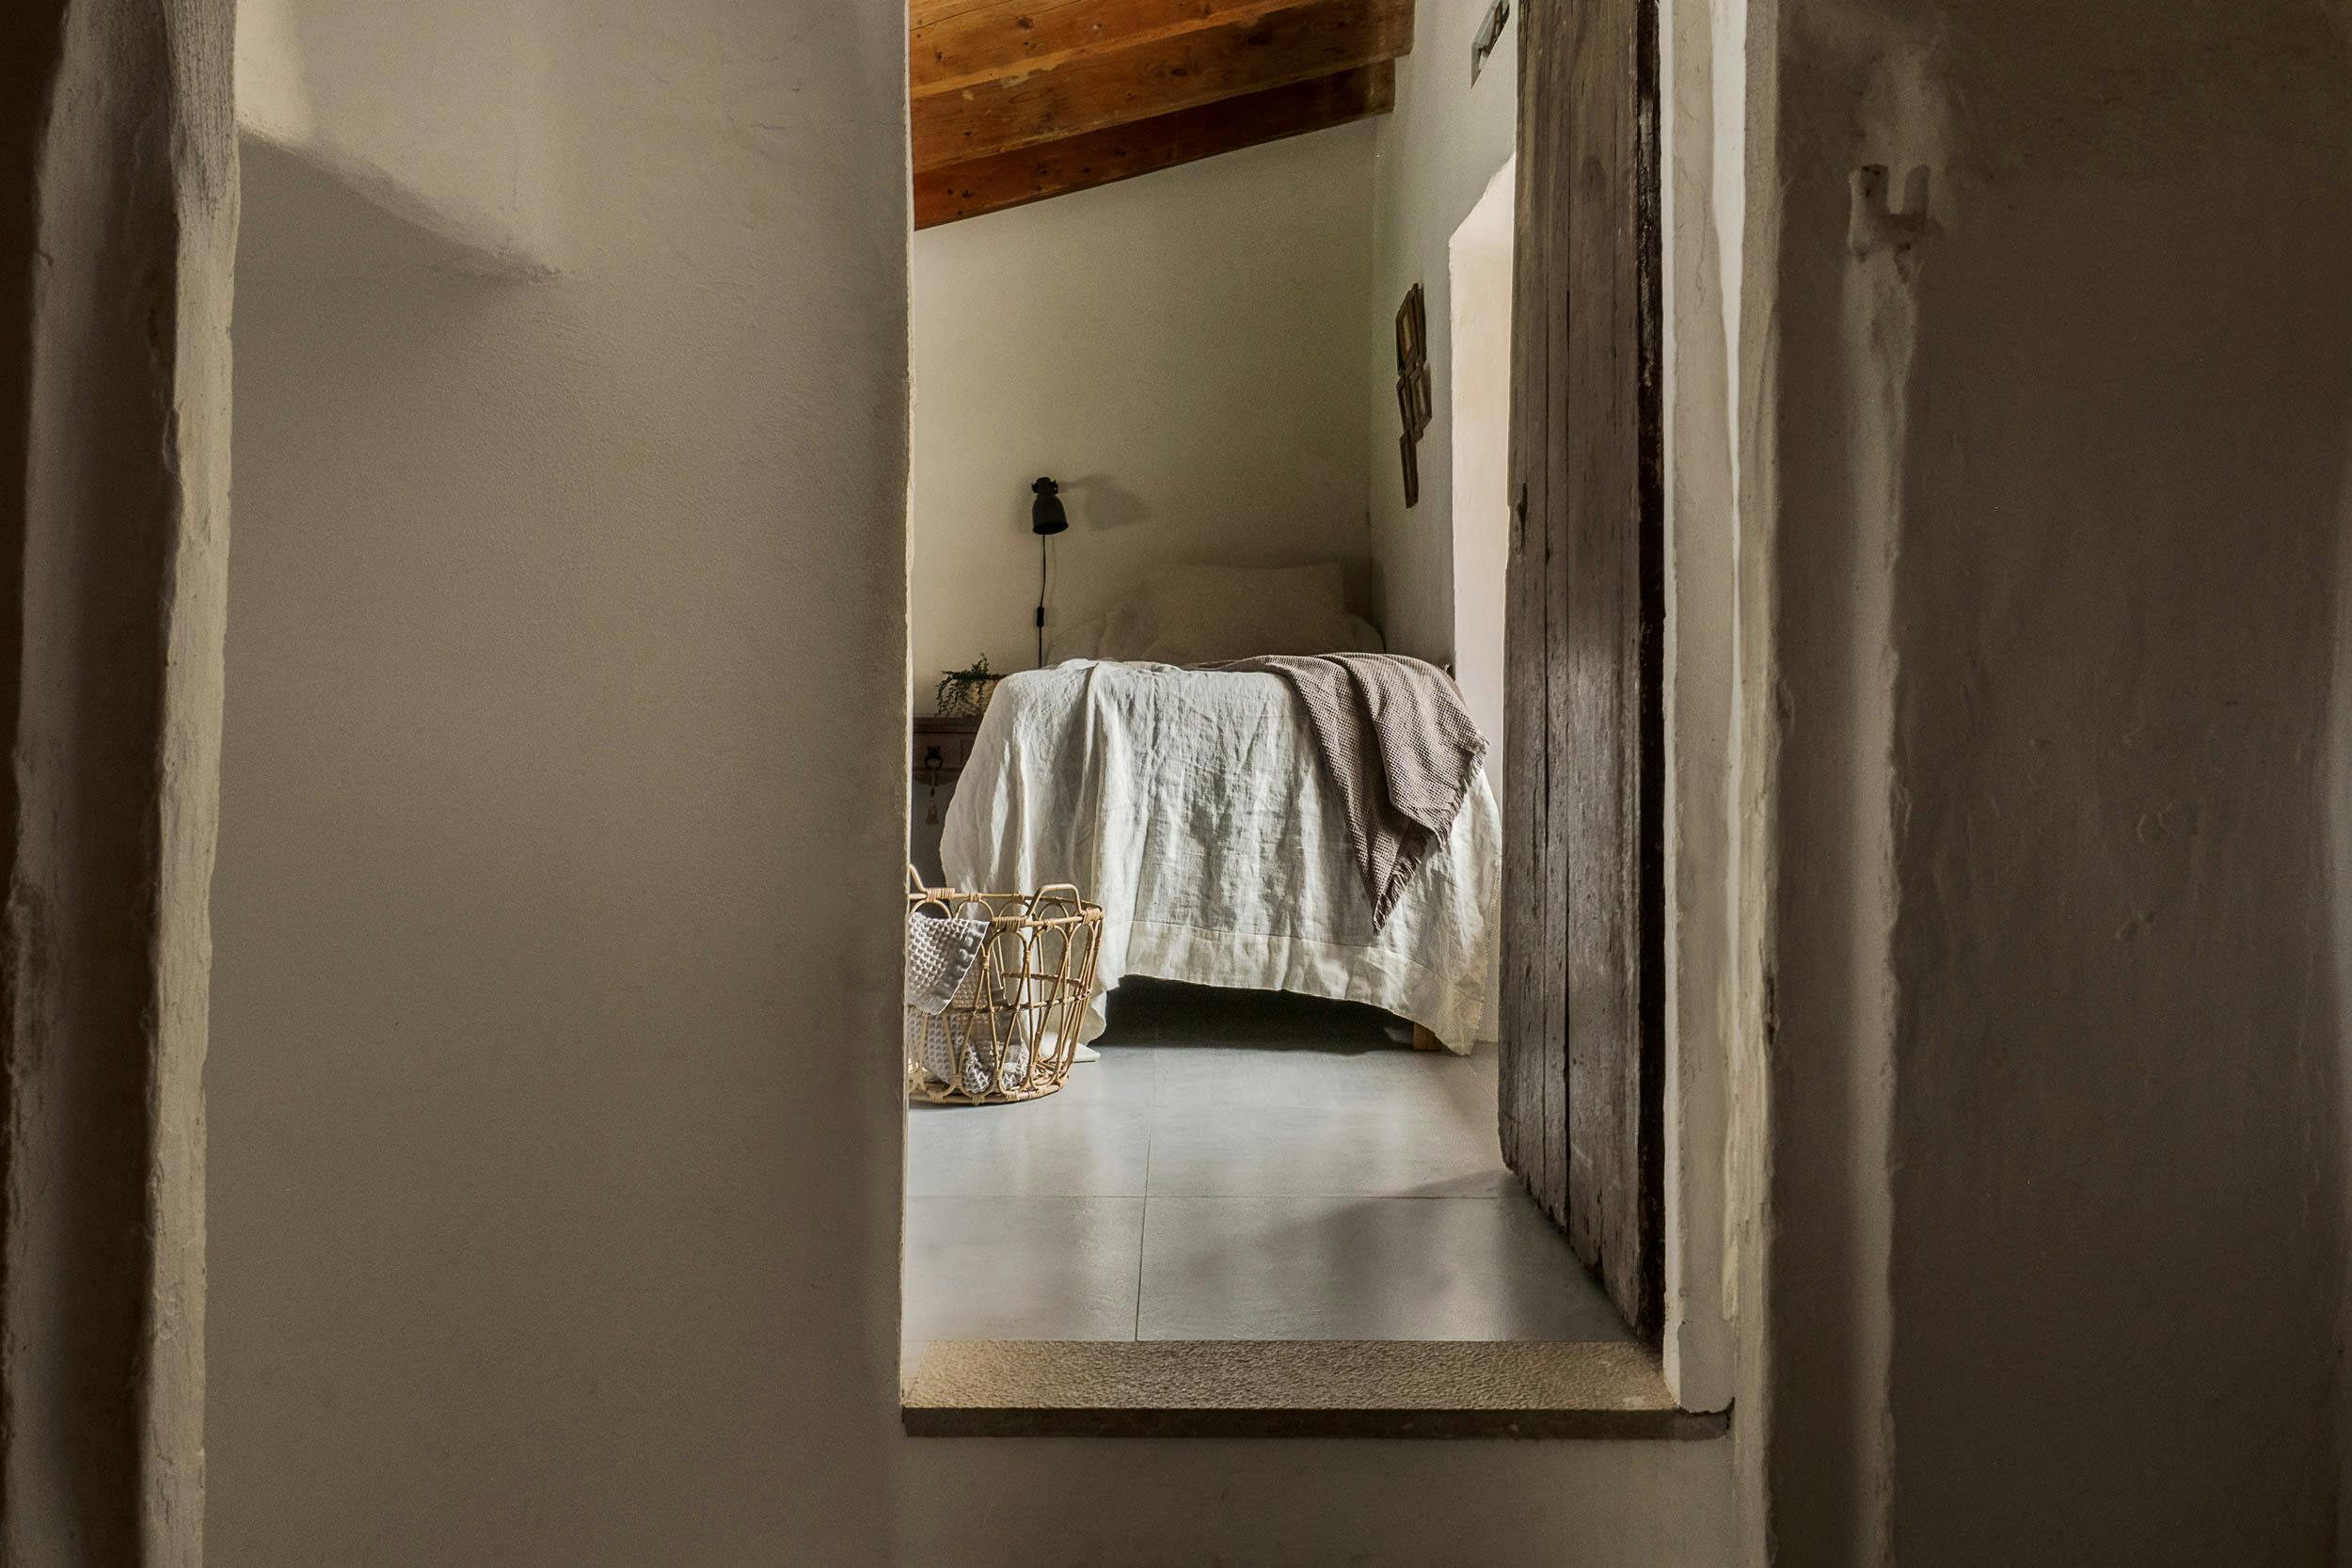 A small, narrow hallway with a mirror on the wall reflects the image of a bedroom with a bed, a towel, and a cup.